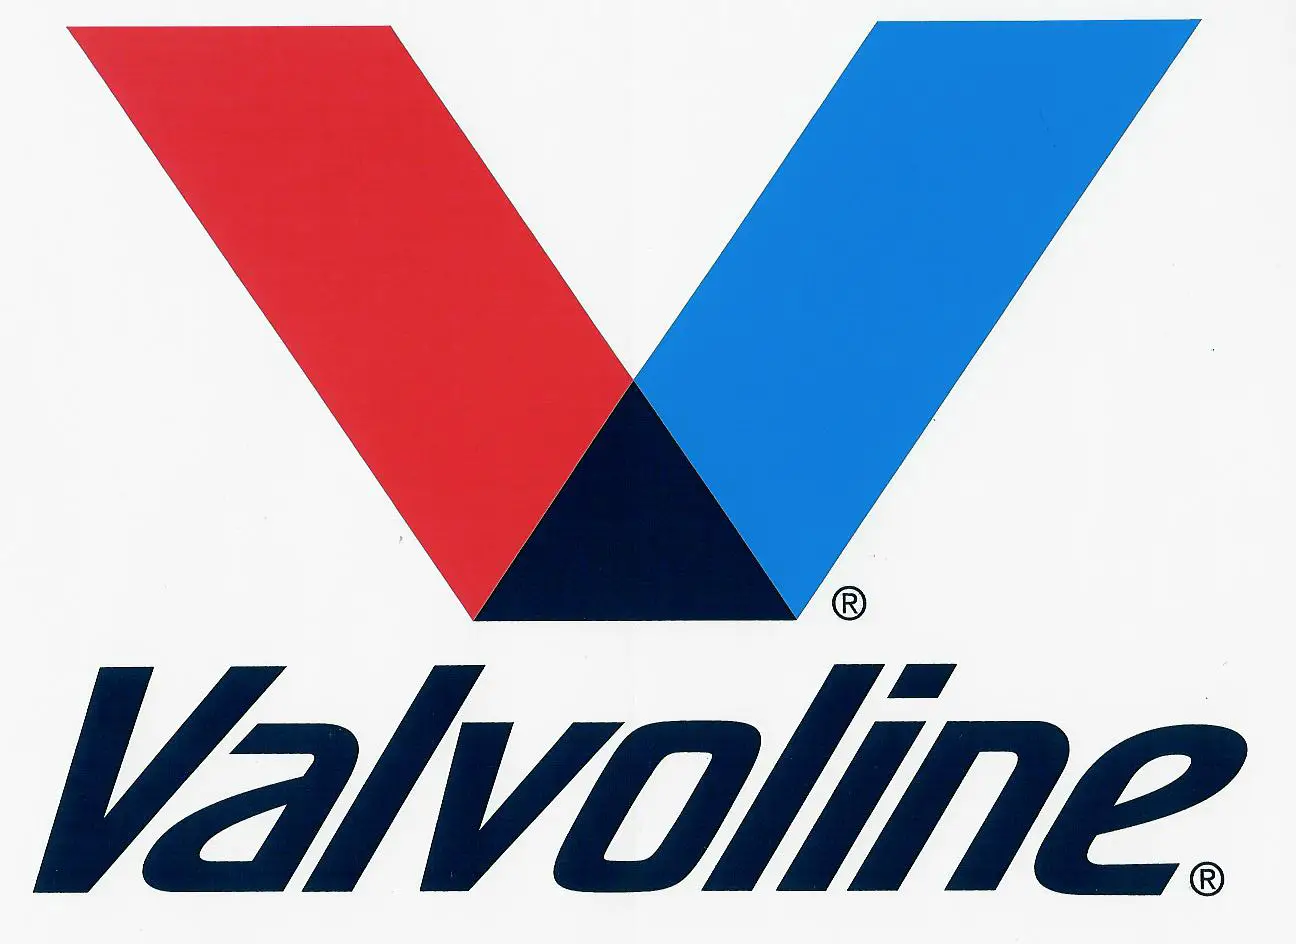 Valvoline Instant Oil Change Revs Up Savings with Mobile Coupons